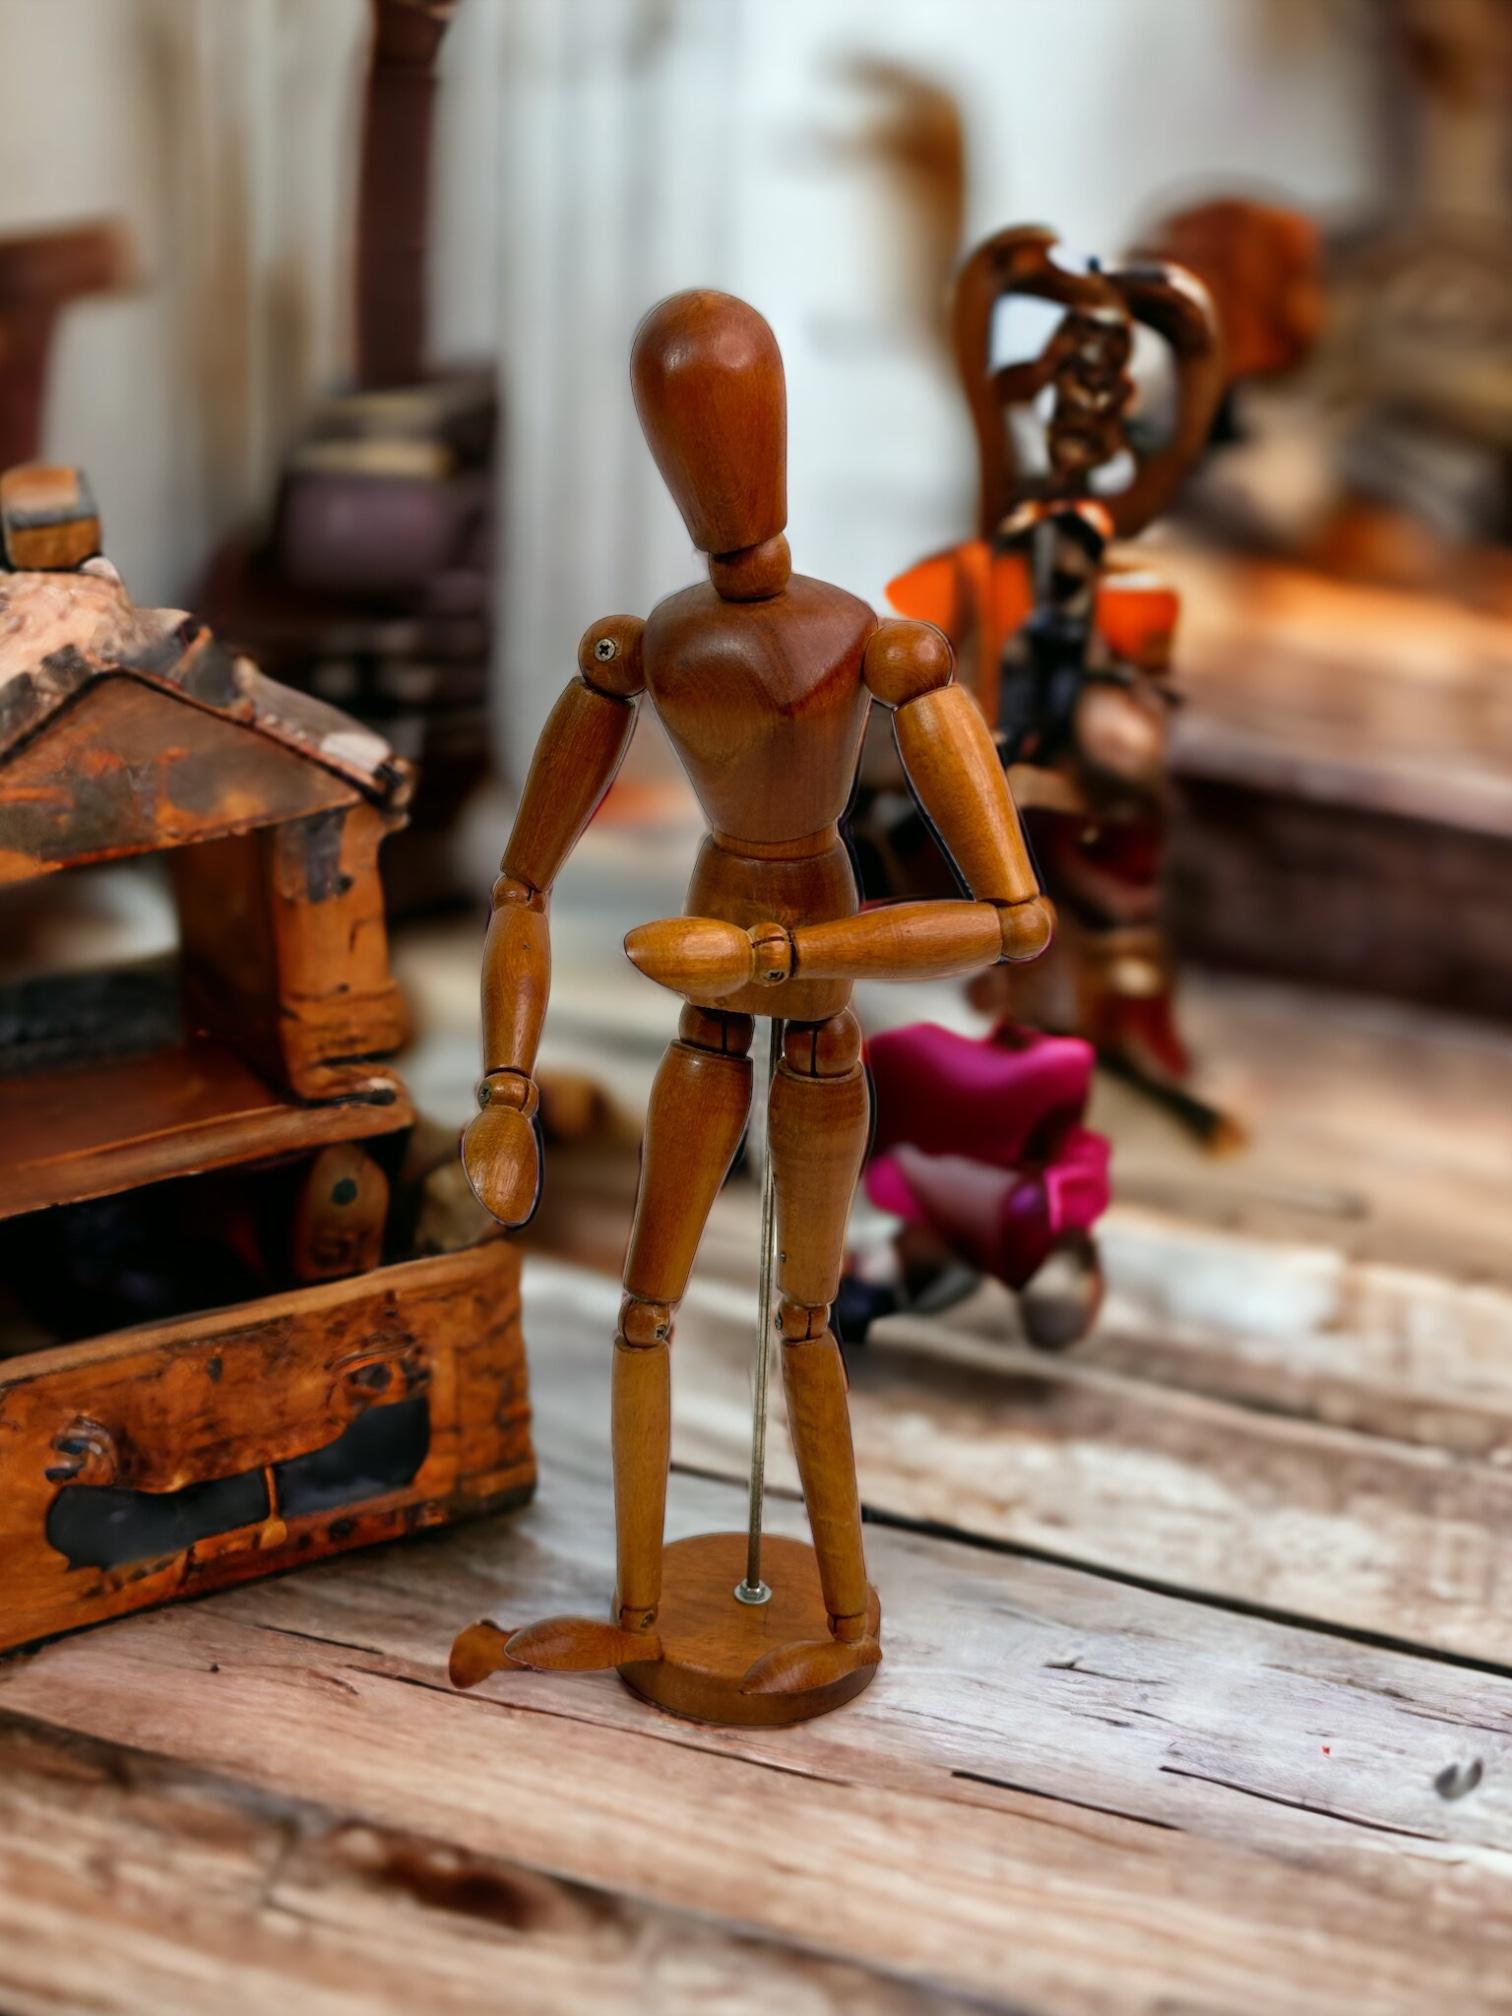 A handmade wooden Artist mannequin model - all joints move as they should. Found on a Estate sale in Verona, Italy.
Shows some wear - but looks beautiful on display! Some scratches and a nice patina due to the age. Makes a nice addition to any room. 